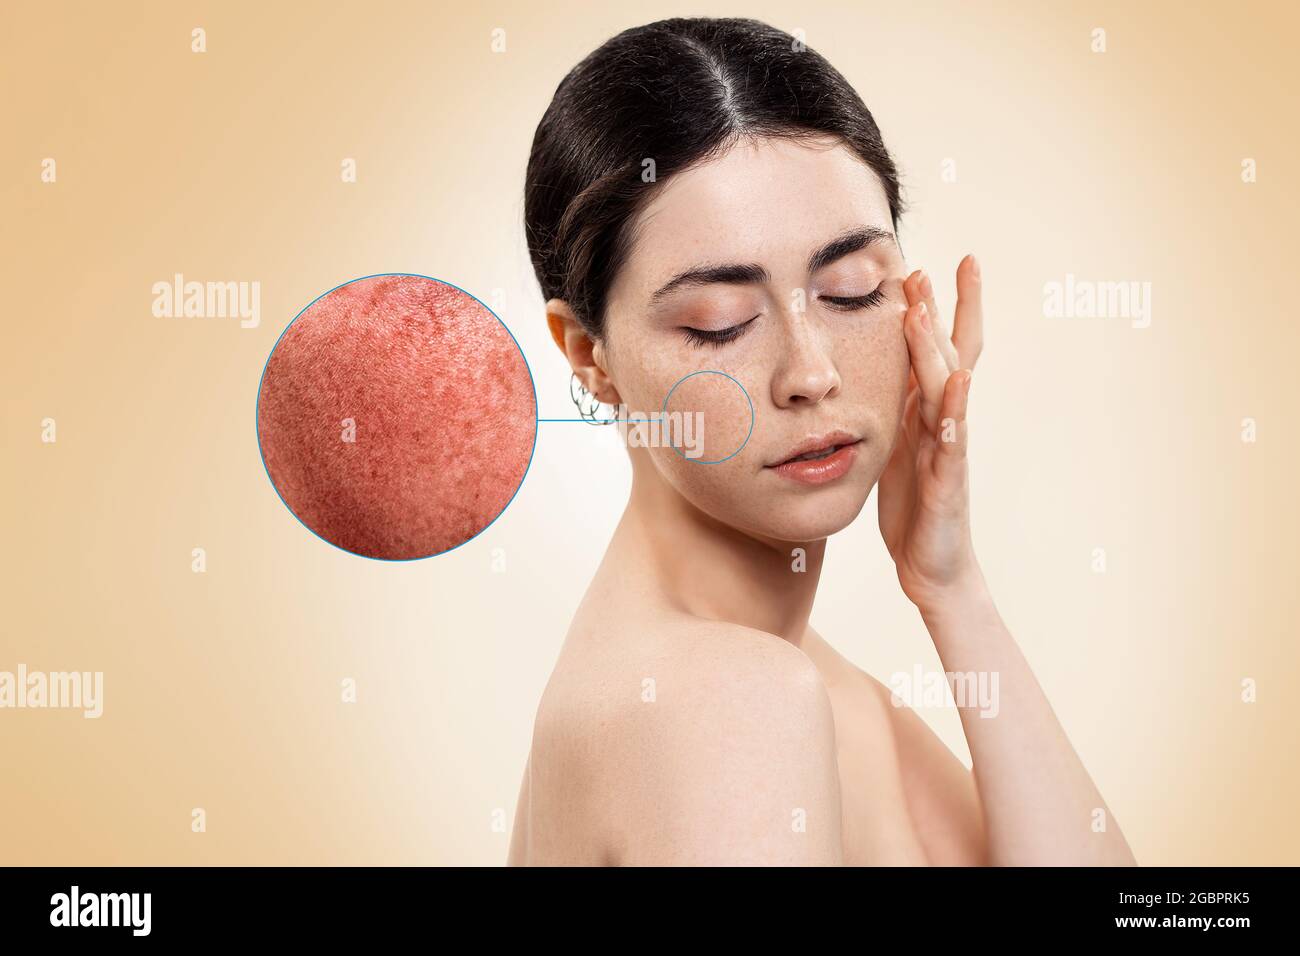 Portrait of a beautiful young woman, with an enlarged circle on her cheek, showing inflamed blood vessels. Beige background. Horizonatal. Rosacea trea Stock Photo